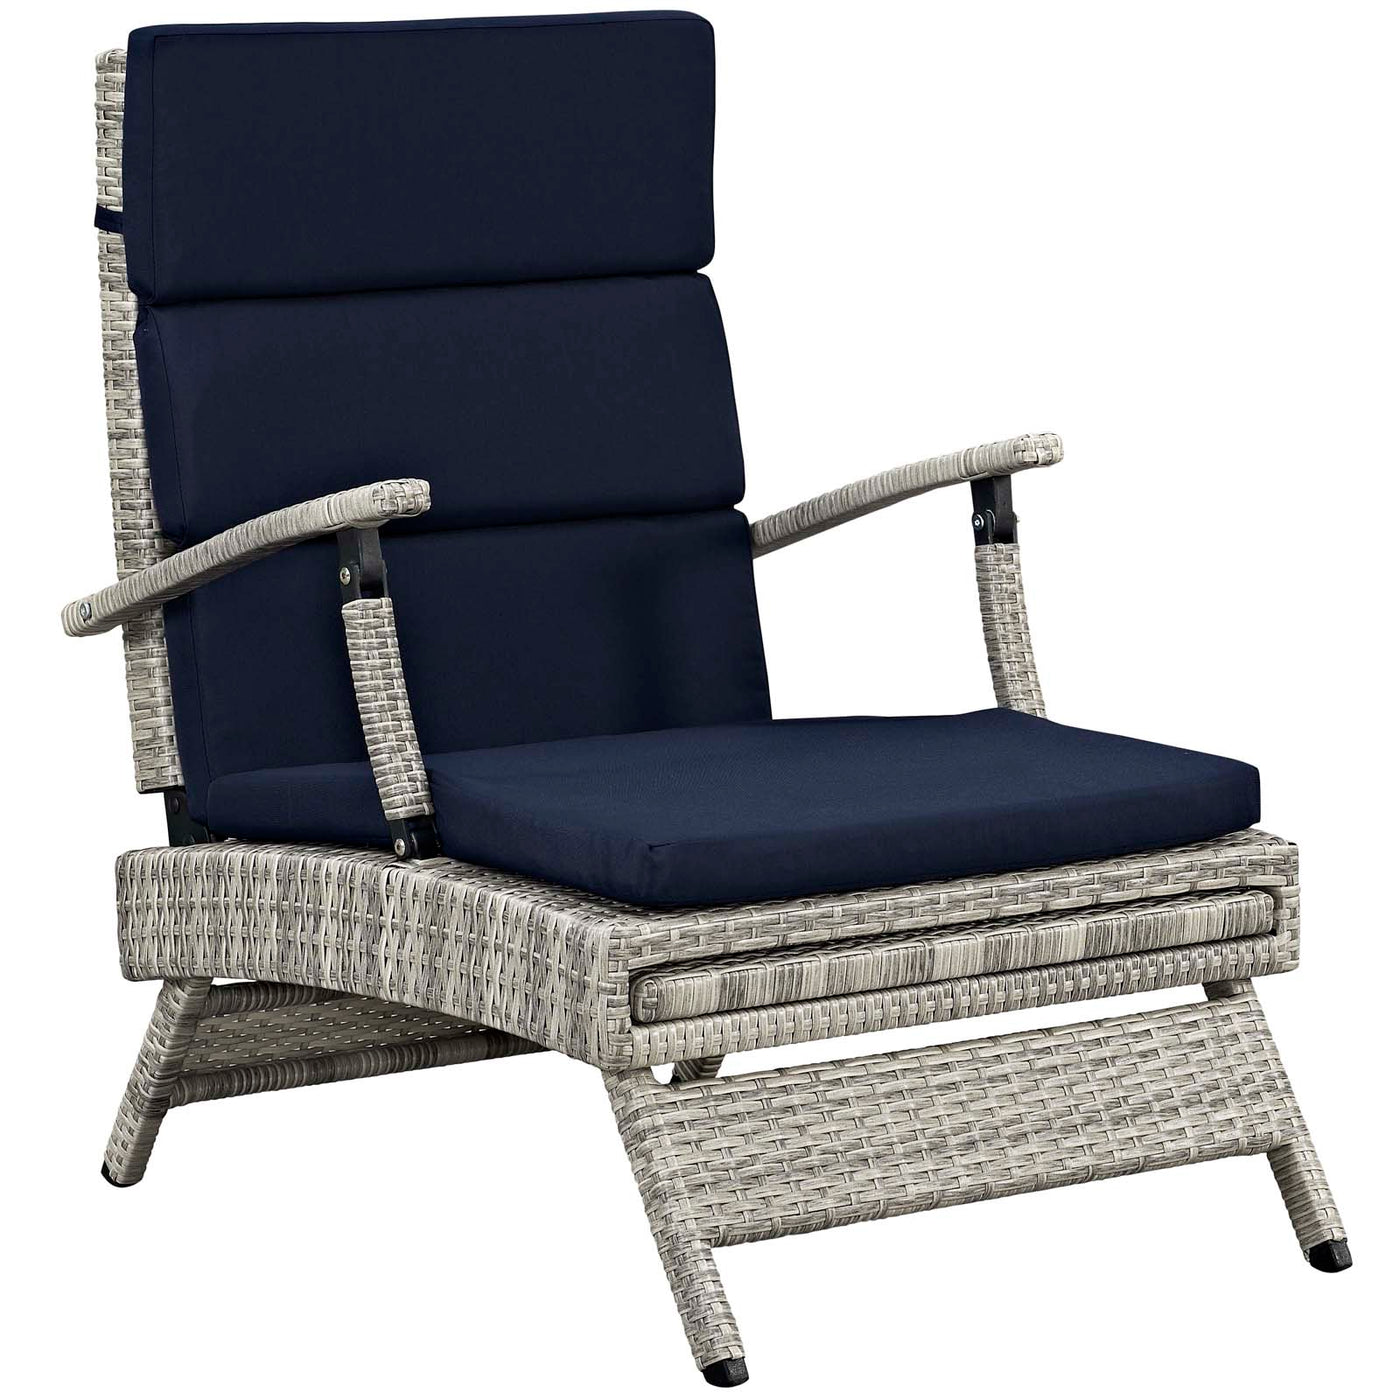 Envisage Chaise Outdoor Patio Wicker Rattan Lounge Chair